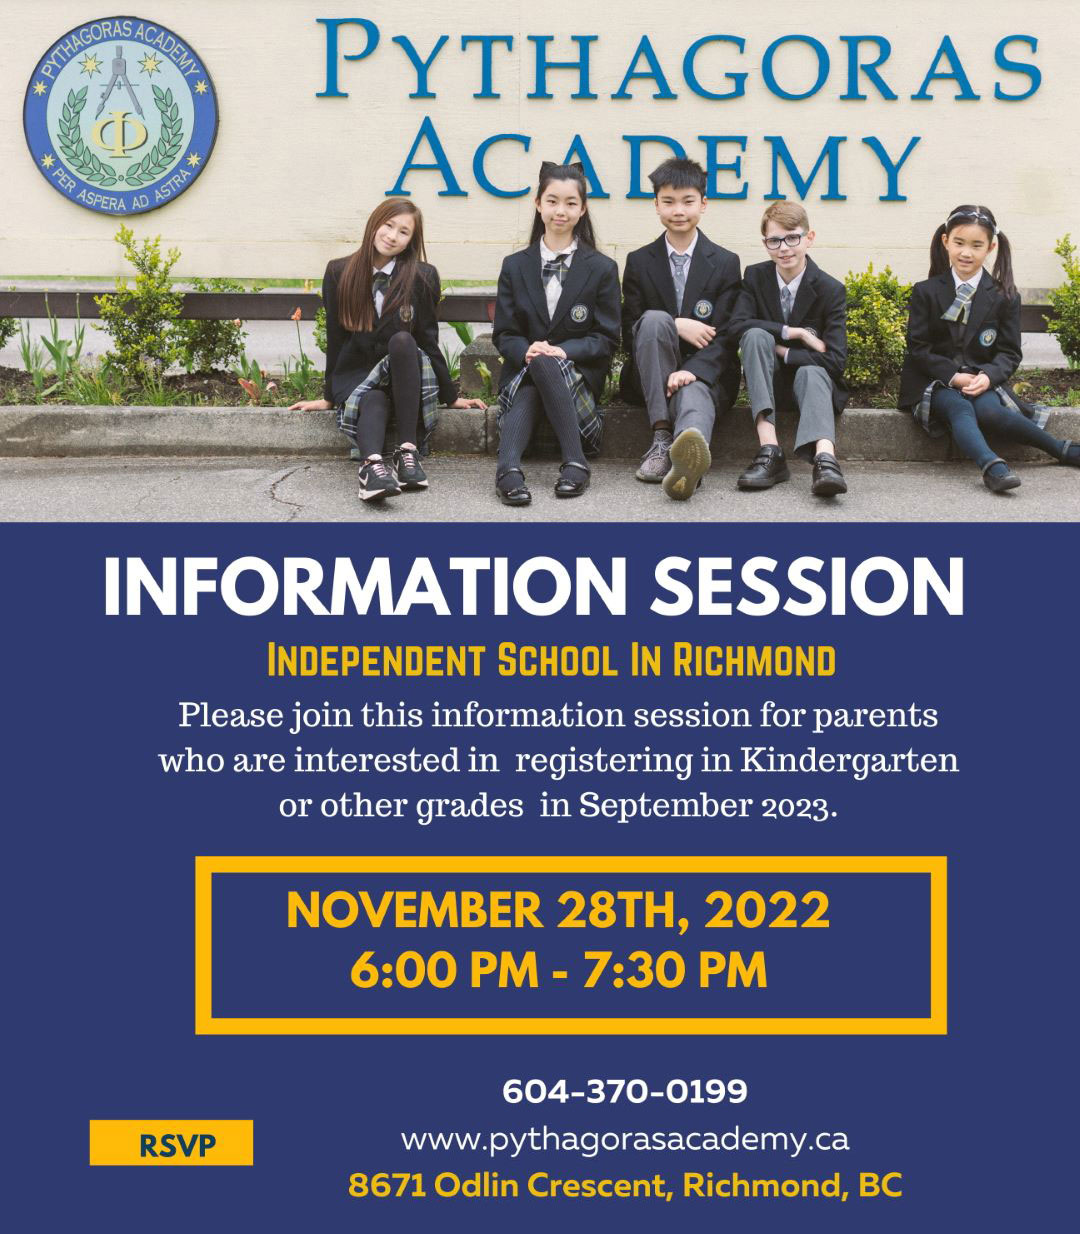 November 8th, 6 pm: Join our 2024/25 Admission Information Session